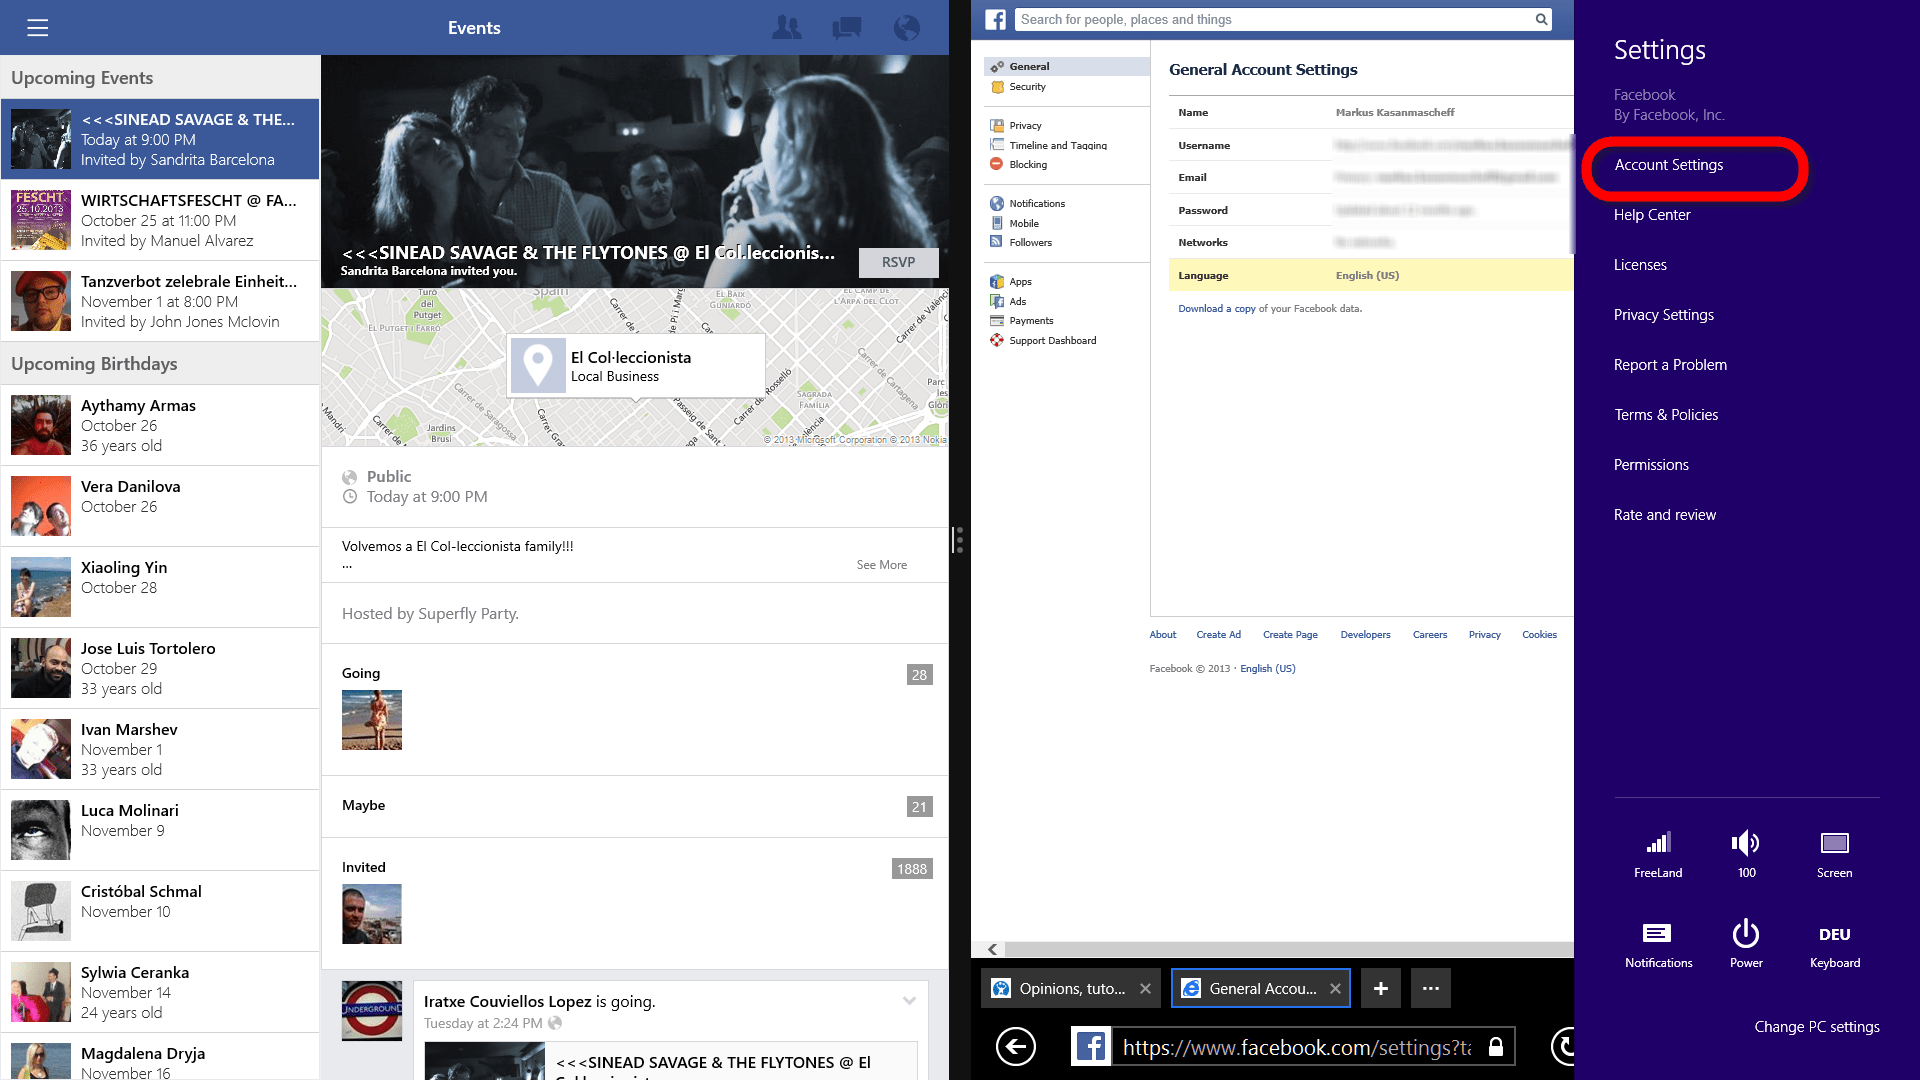 facebook downlownload for pc